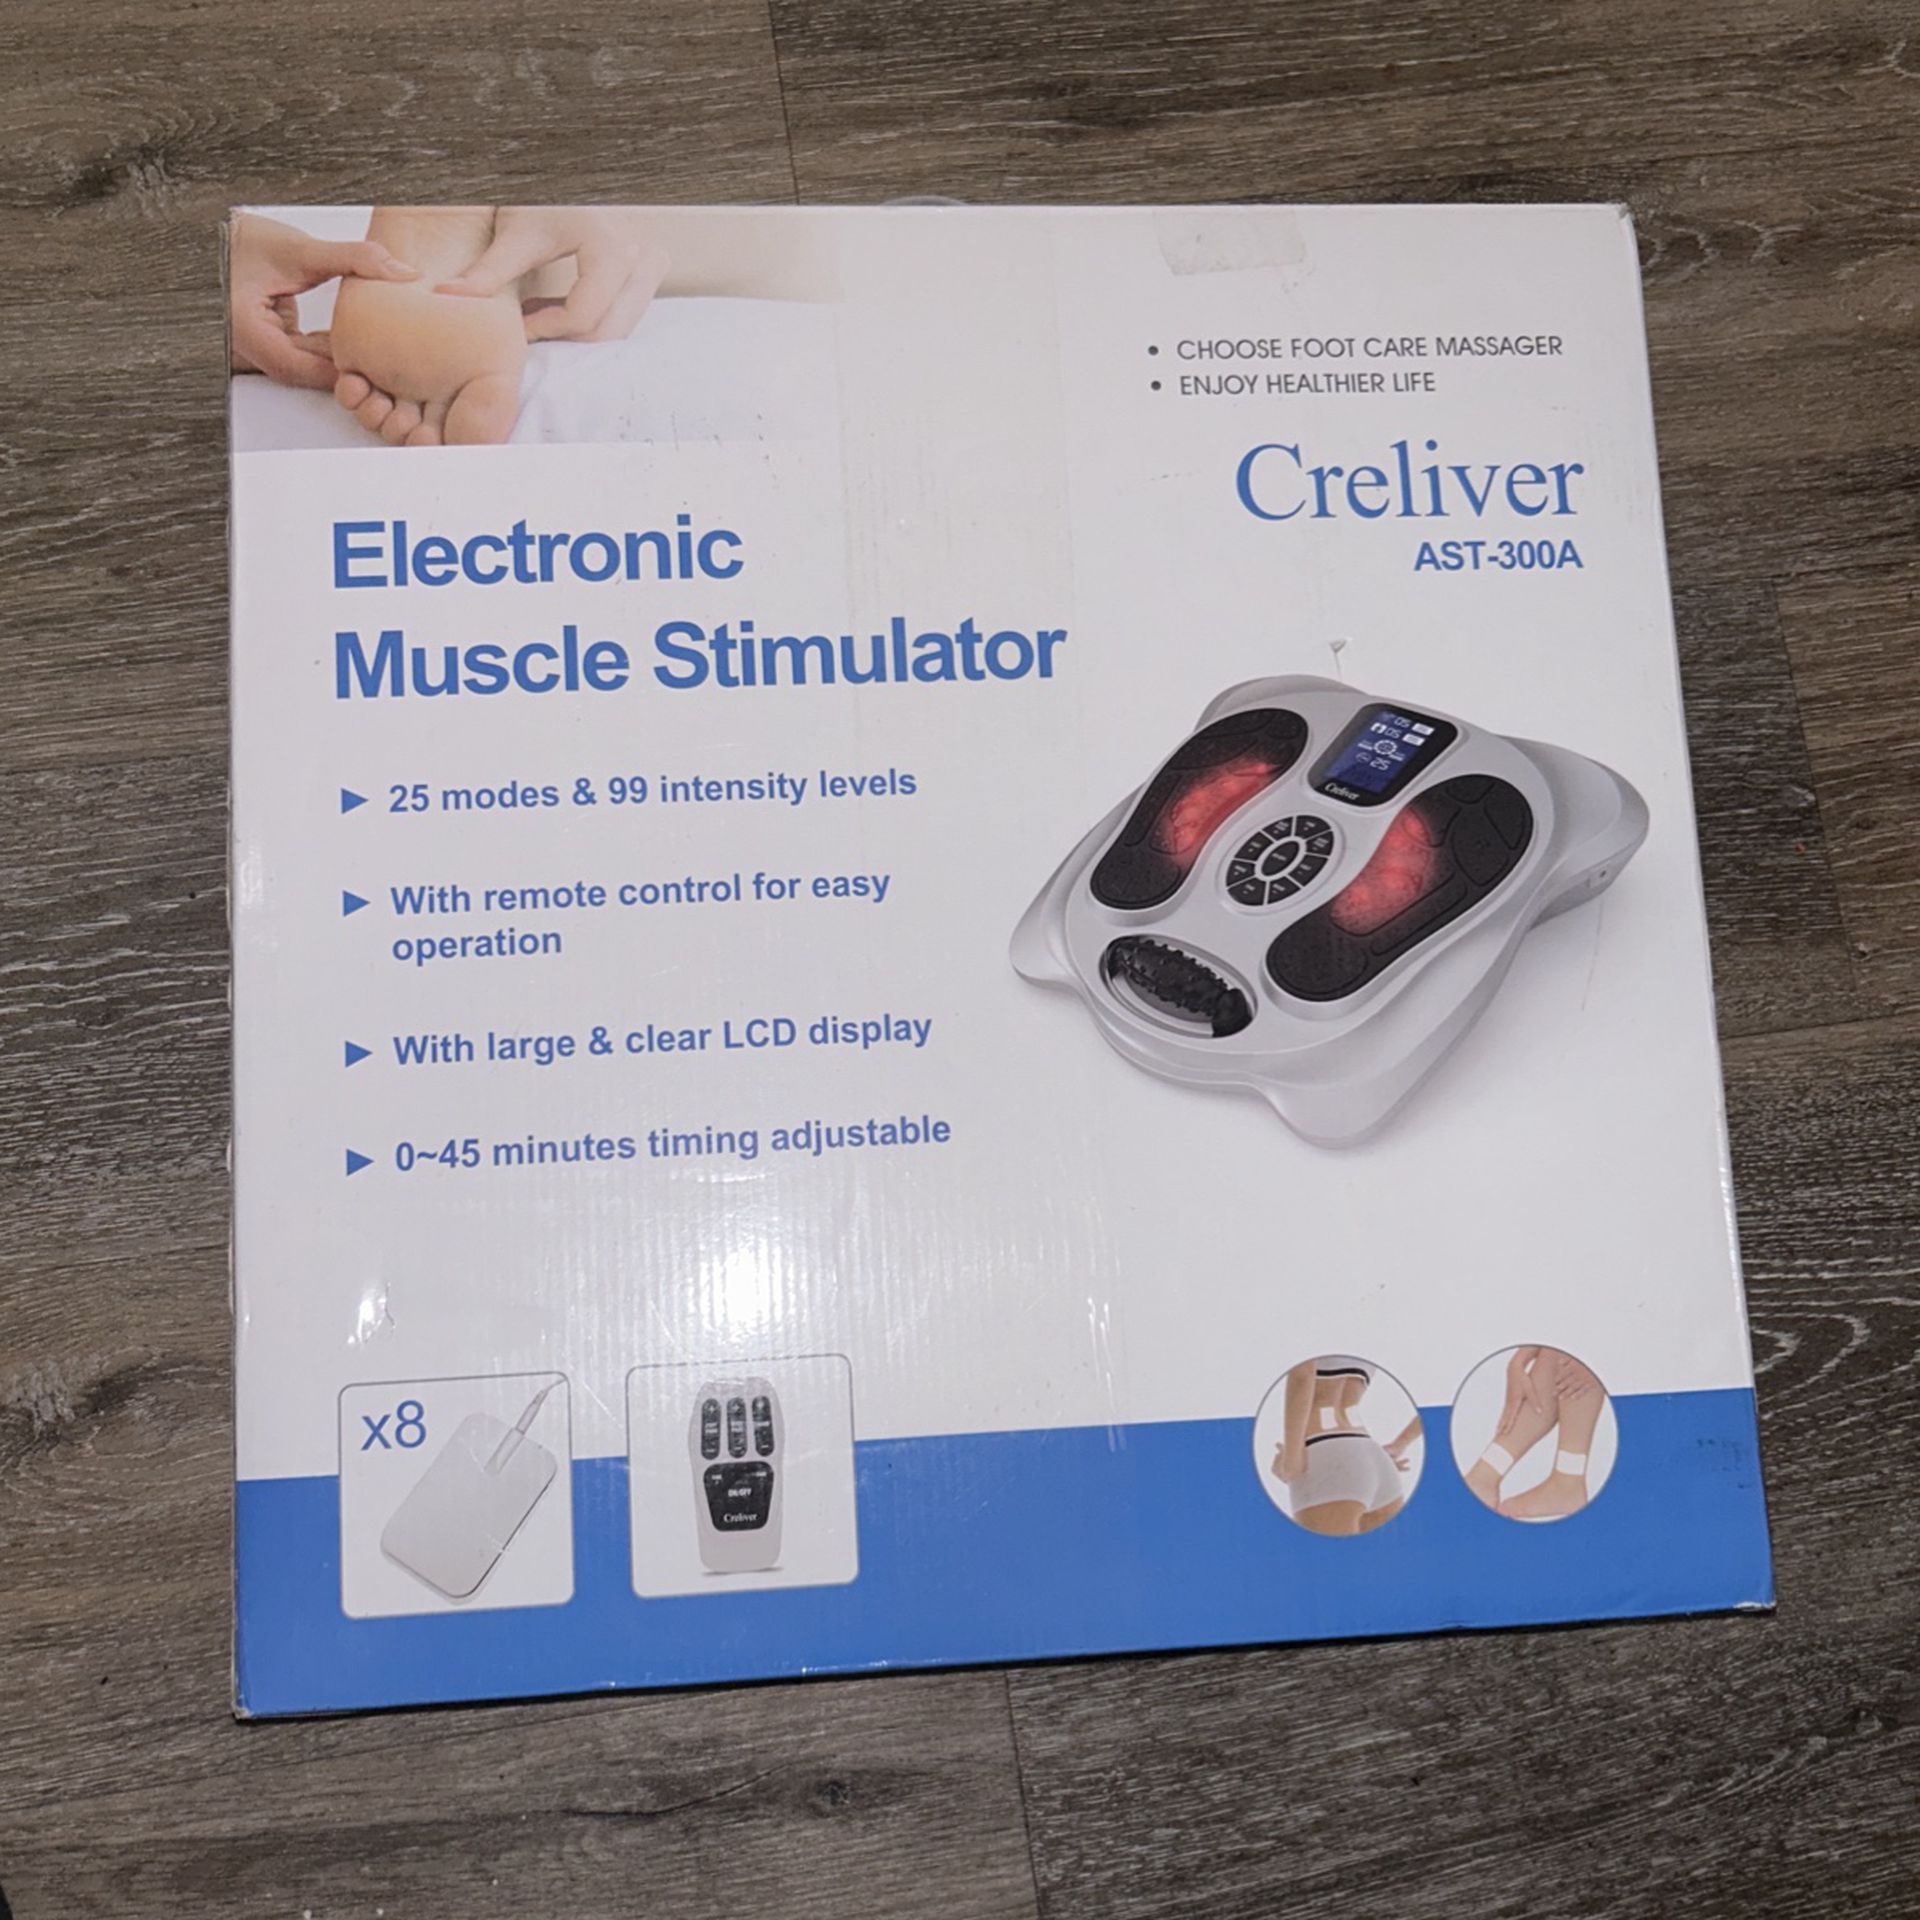 CRELIVER AST-300A ELECTRONIC MUSCLE STIMULATOR